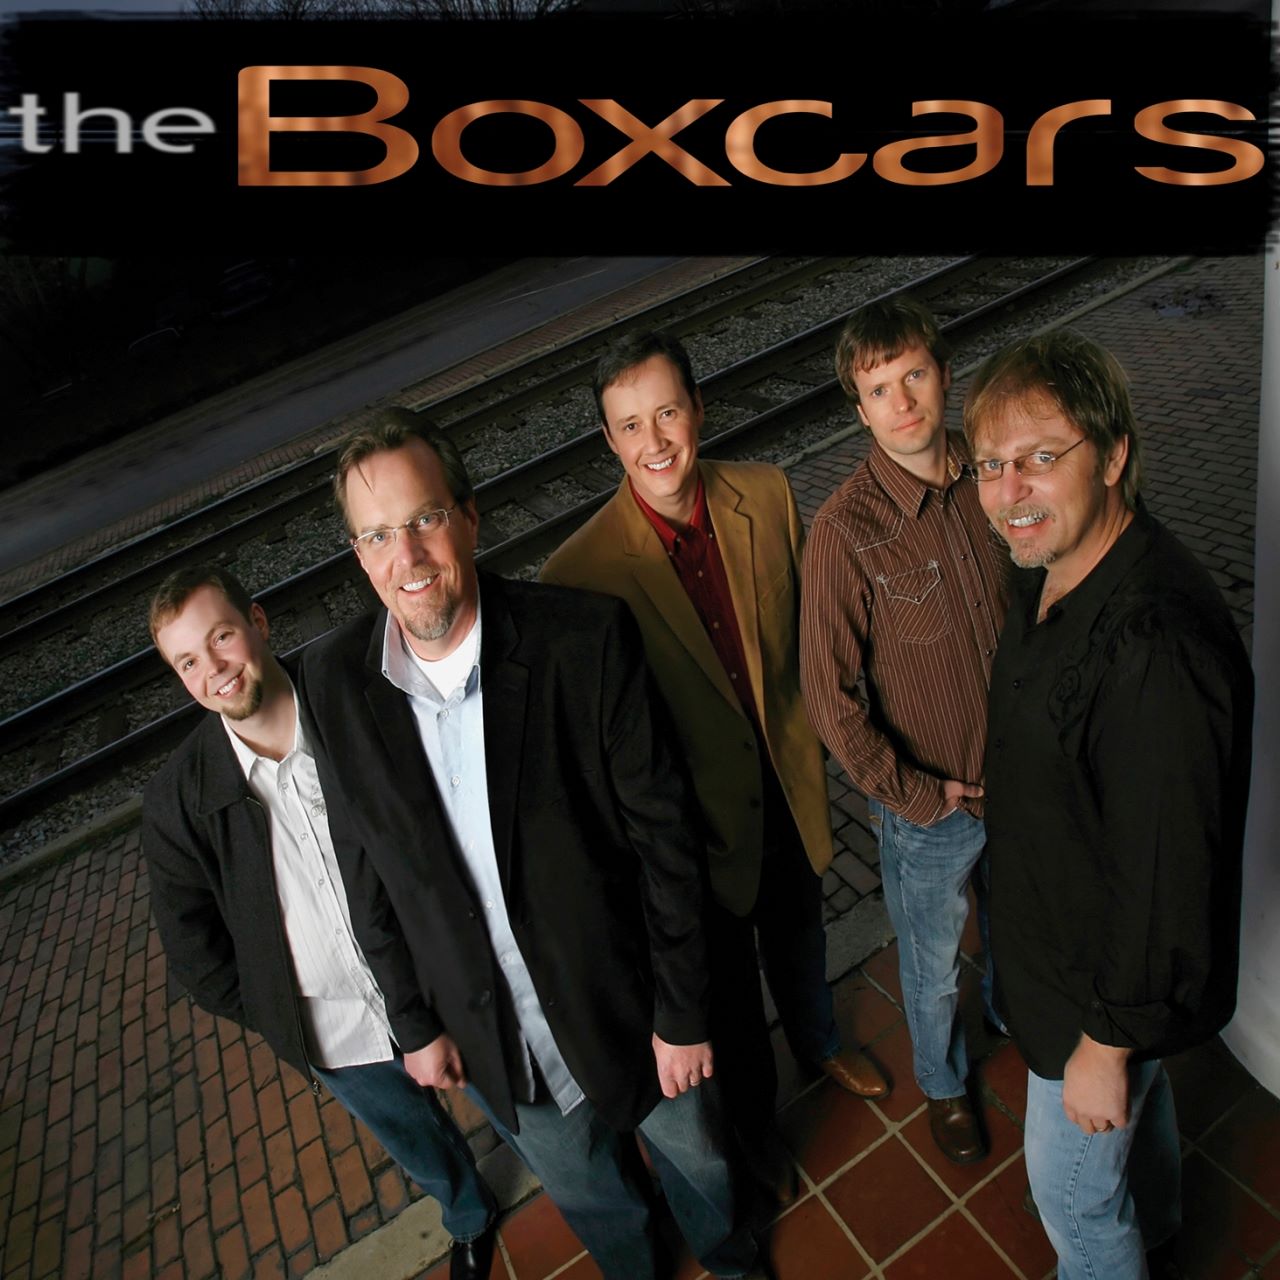 Boxcars - The Boxcars cover album